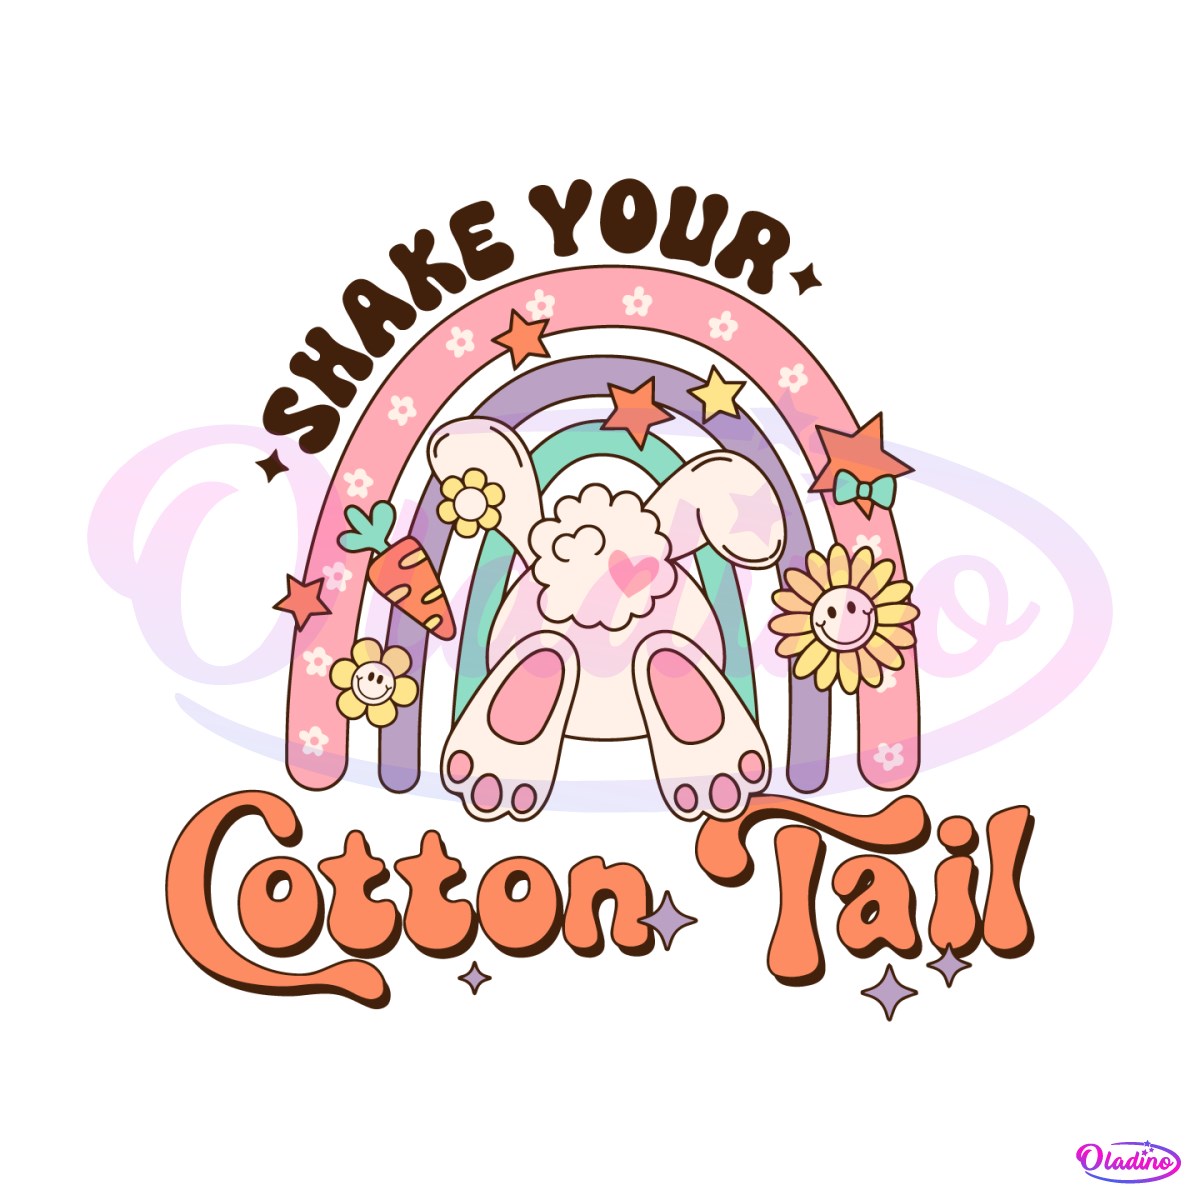 shake-your-cotton-tail-bunny-svg